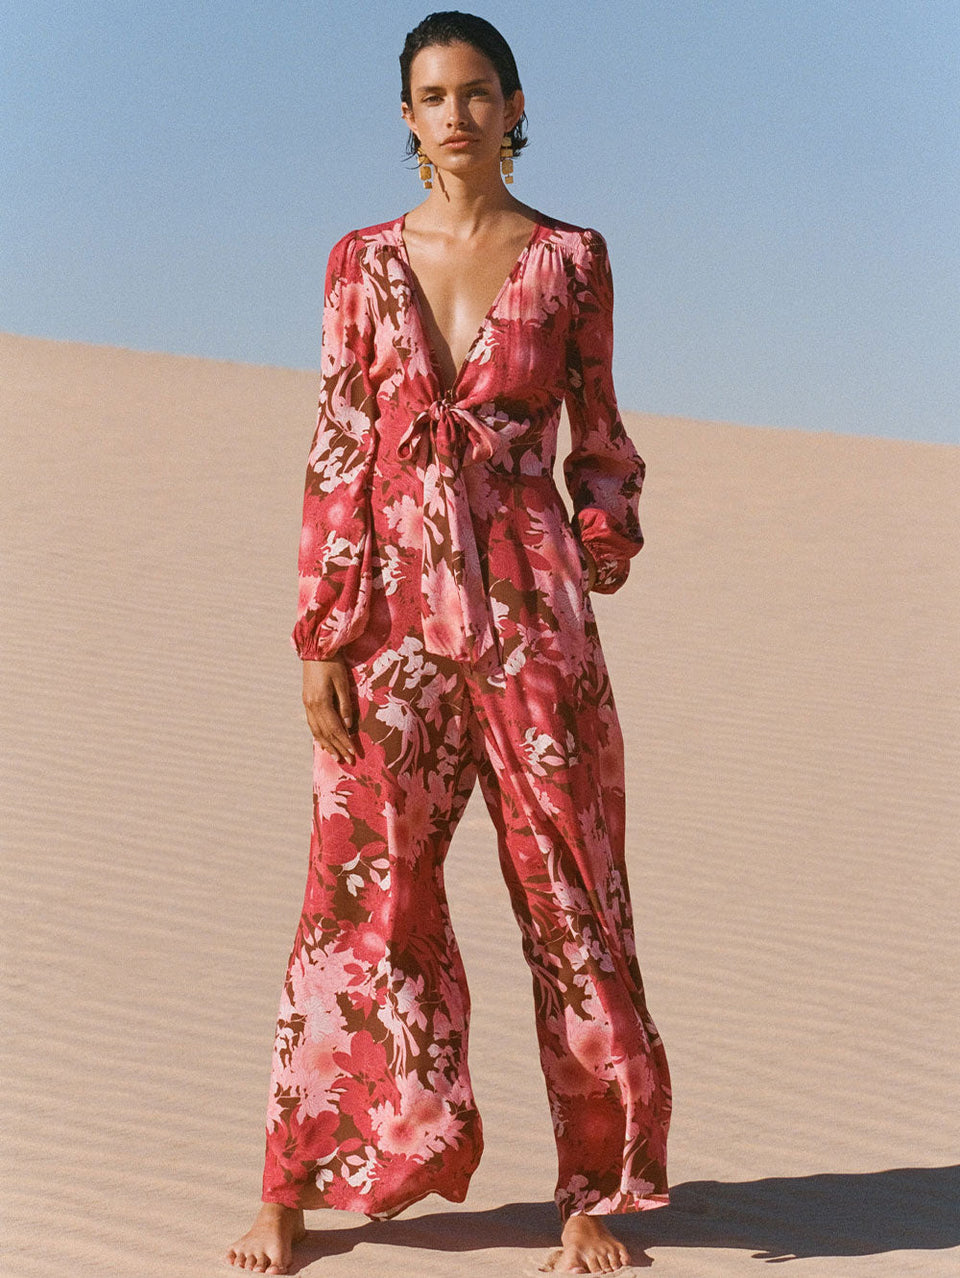 Campaign model in desert wears KIVARI Hacienda Jumpsuit: A red, pink and brown floral jumpsuit with ribbon tie front and long sleeves, crafted from sustainable LENZING Viscose Crepe.